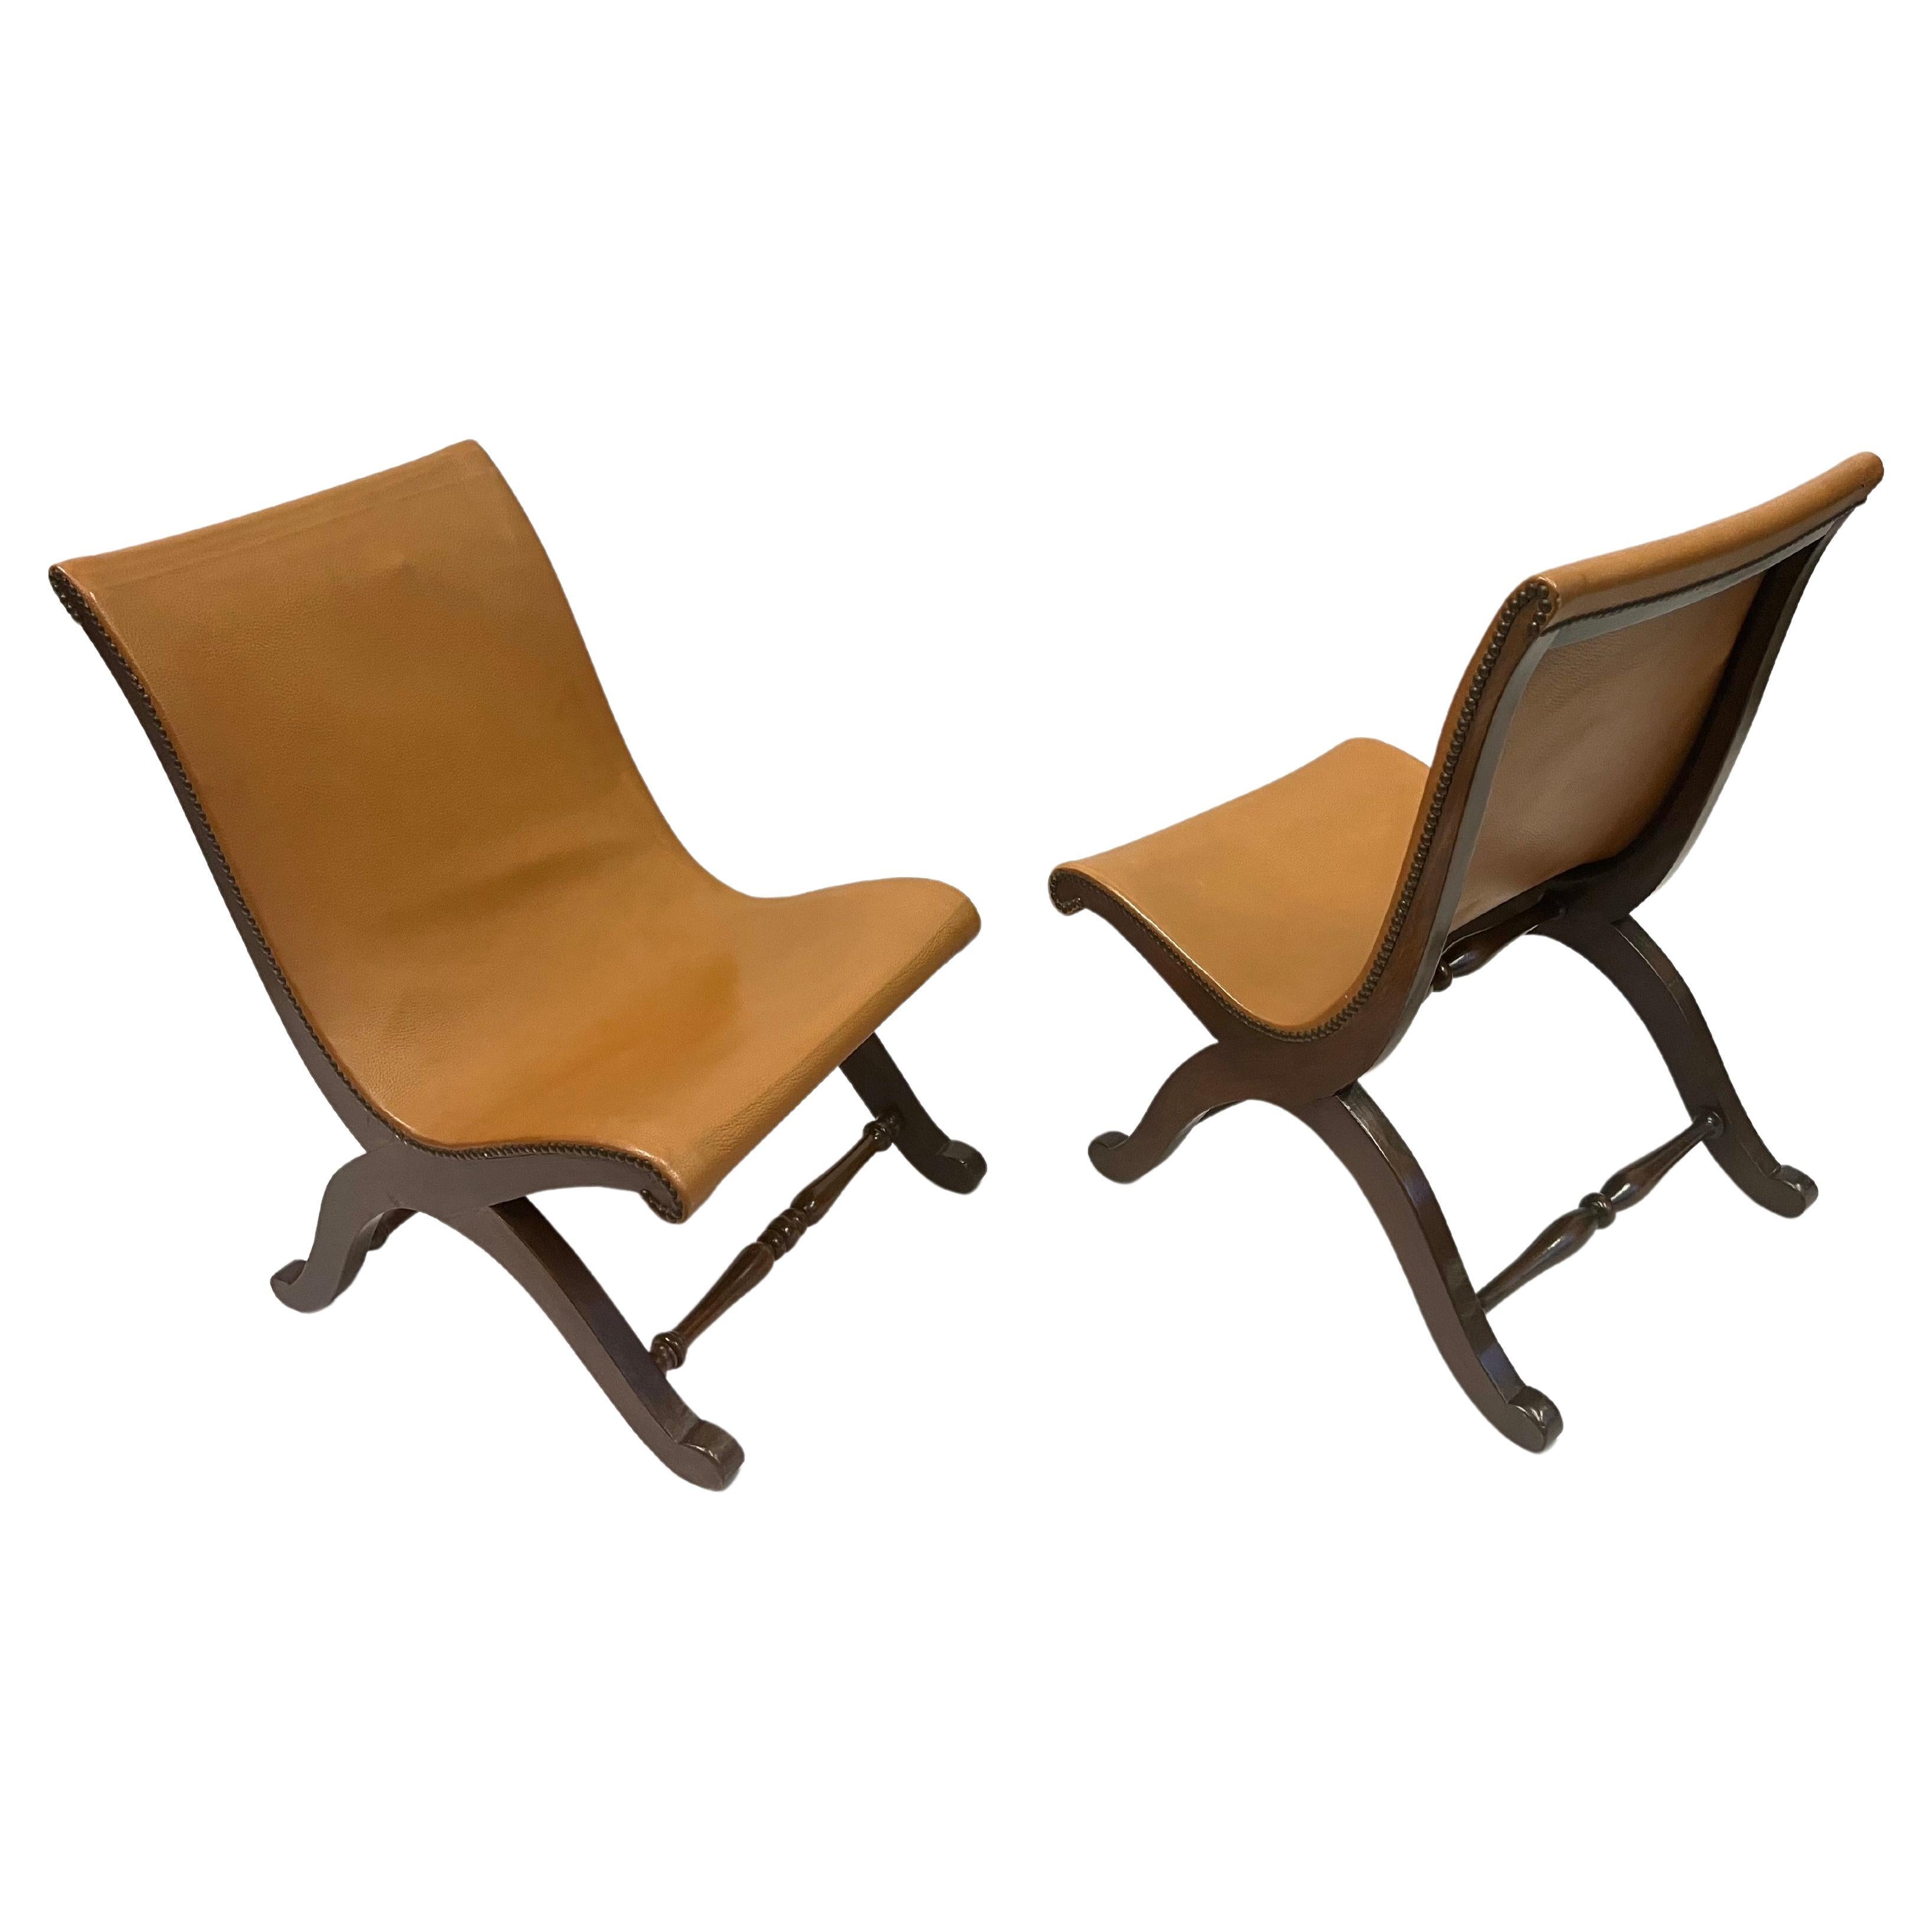 Pair of French Modern Neoclassical Leather Lounge / Slipper Chairs, Andre Arbus For Sale